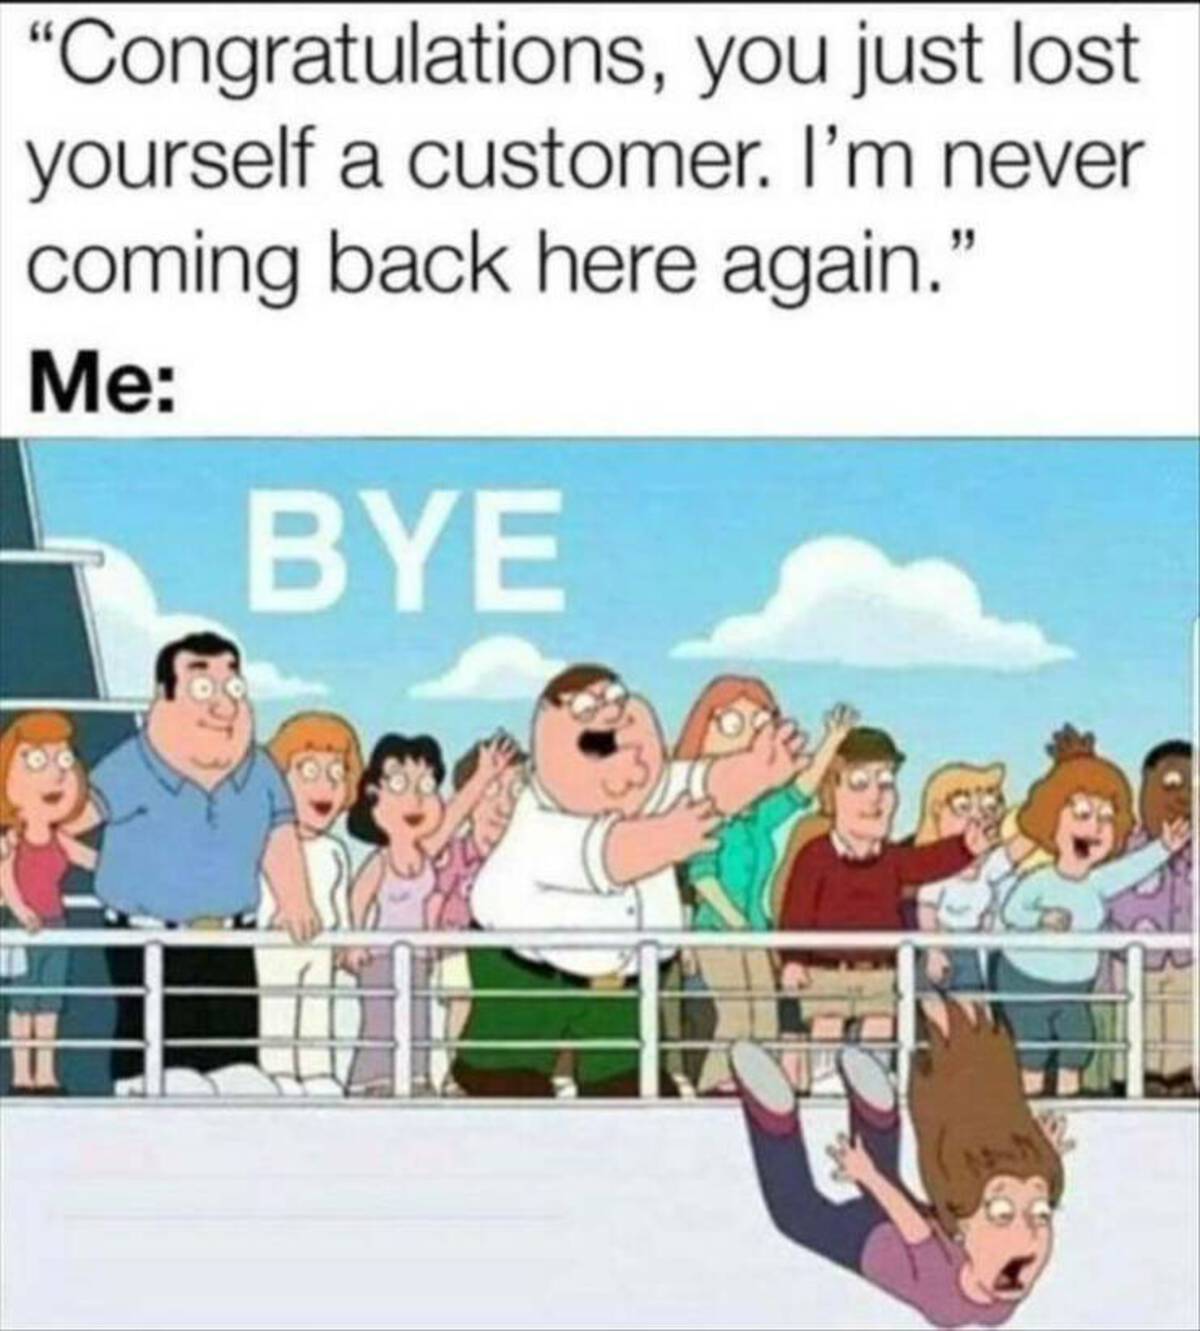 you lost a customer meme - "Congratulations, you just lost yourself a customer. I'm never coming back here again." Me Bye